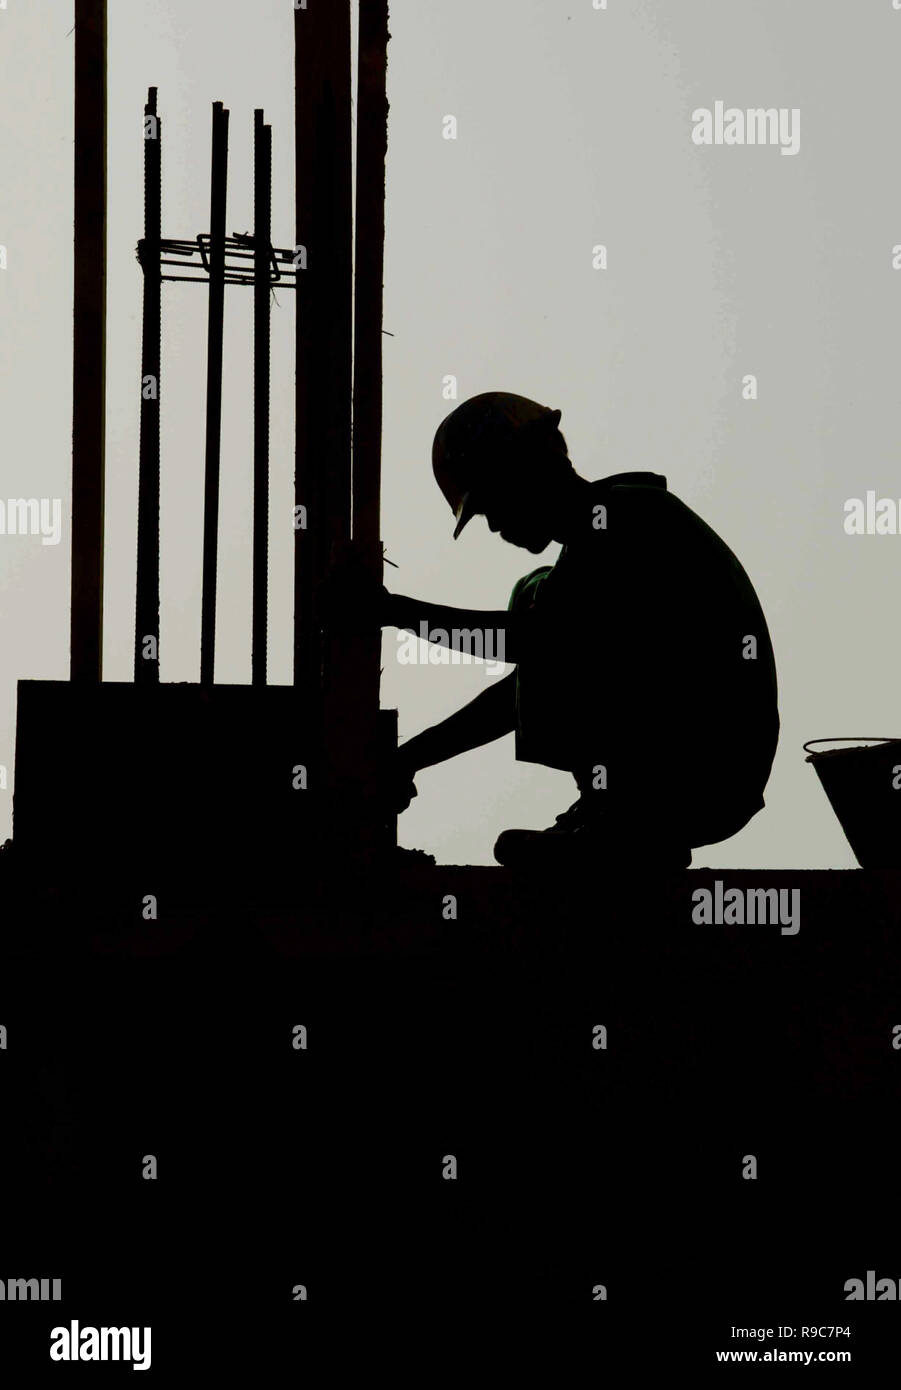 Dubai, United Arab Emirates, UAE - 14JUN2004: Worker silhouetted during the late afternoon while laying a building foundation in the Dubai Marina area which was a hub of hundreds of major construction projects, during the boom times. Stock Photo